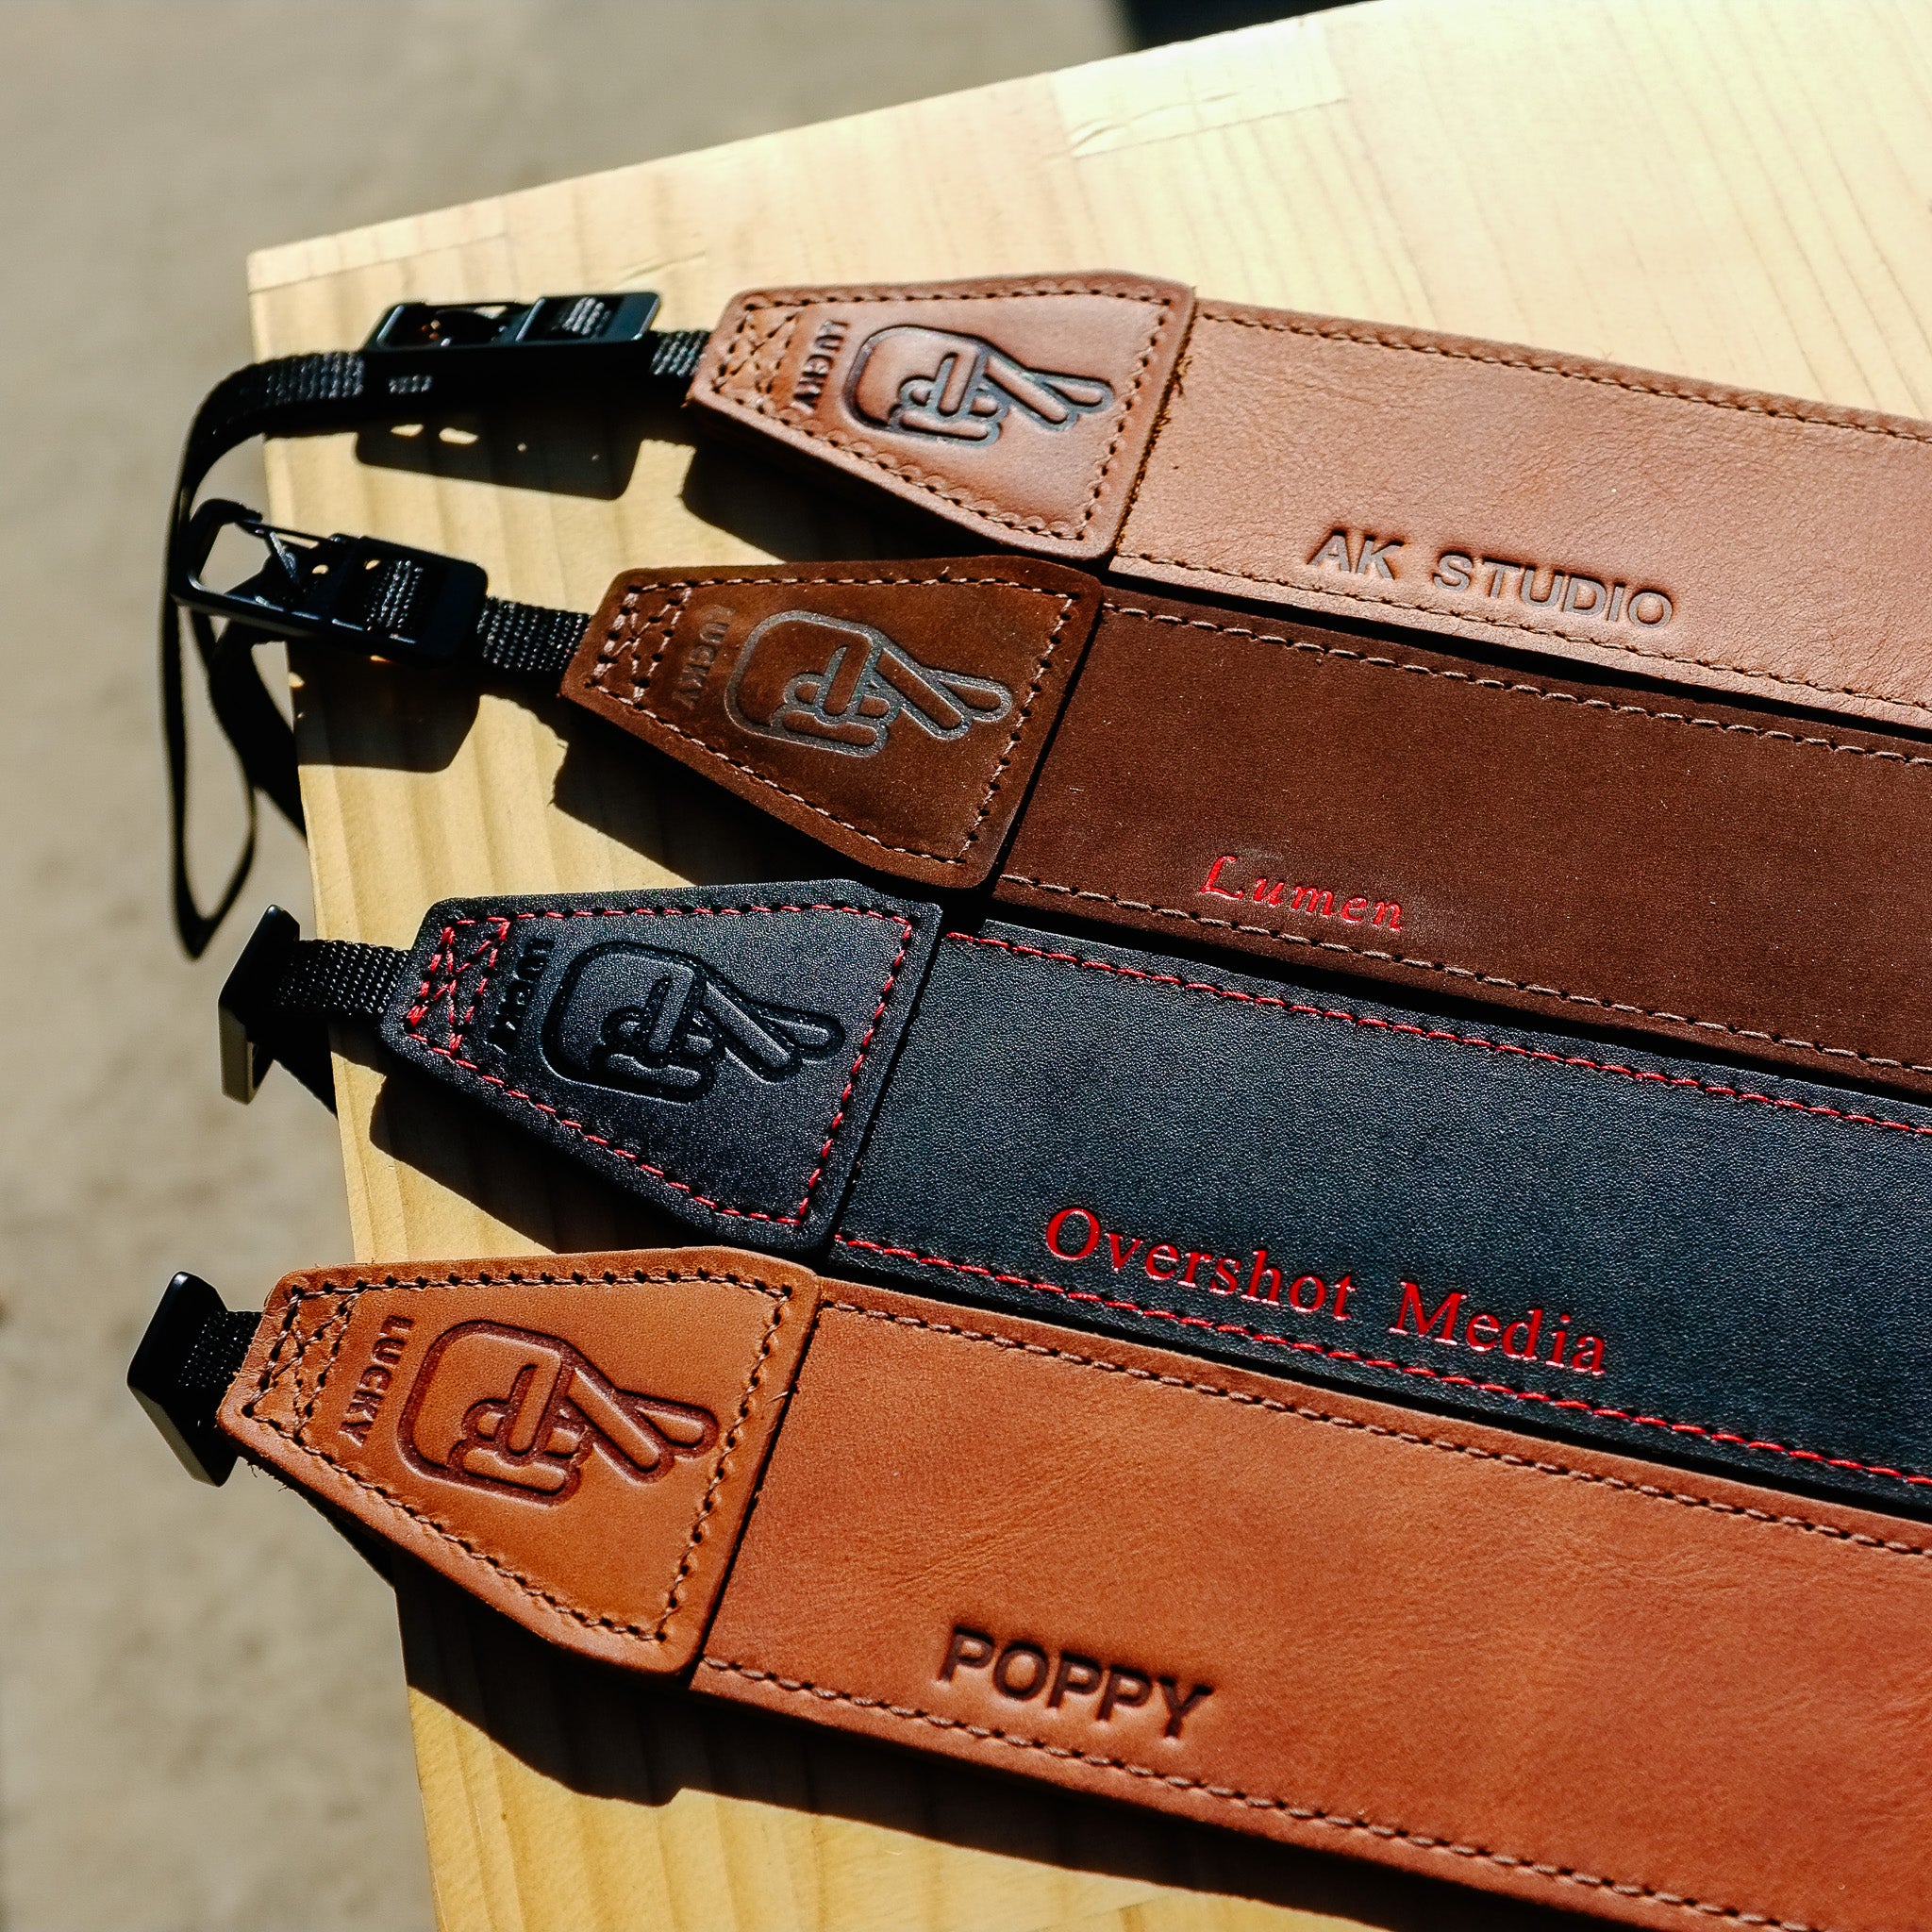 Four leather camera straps with personalisation